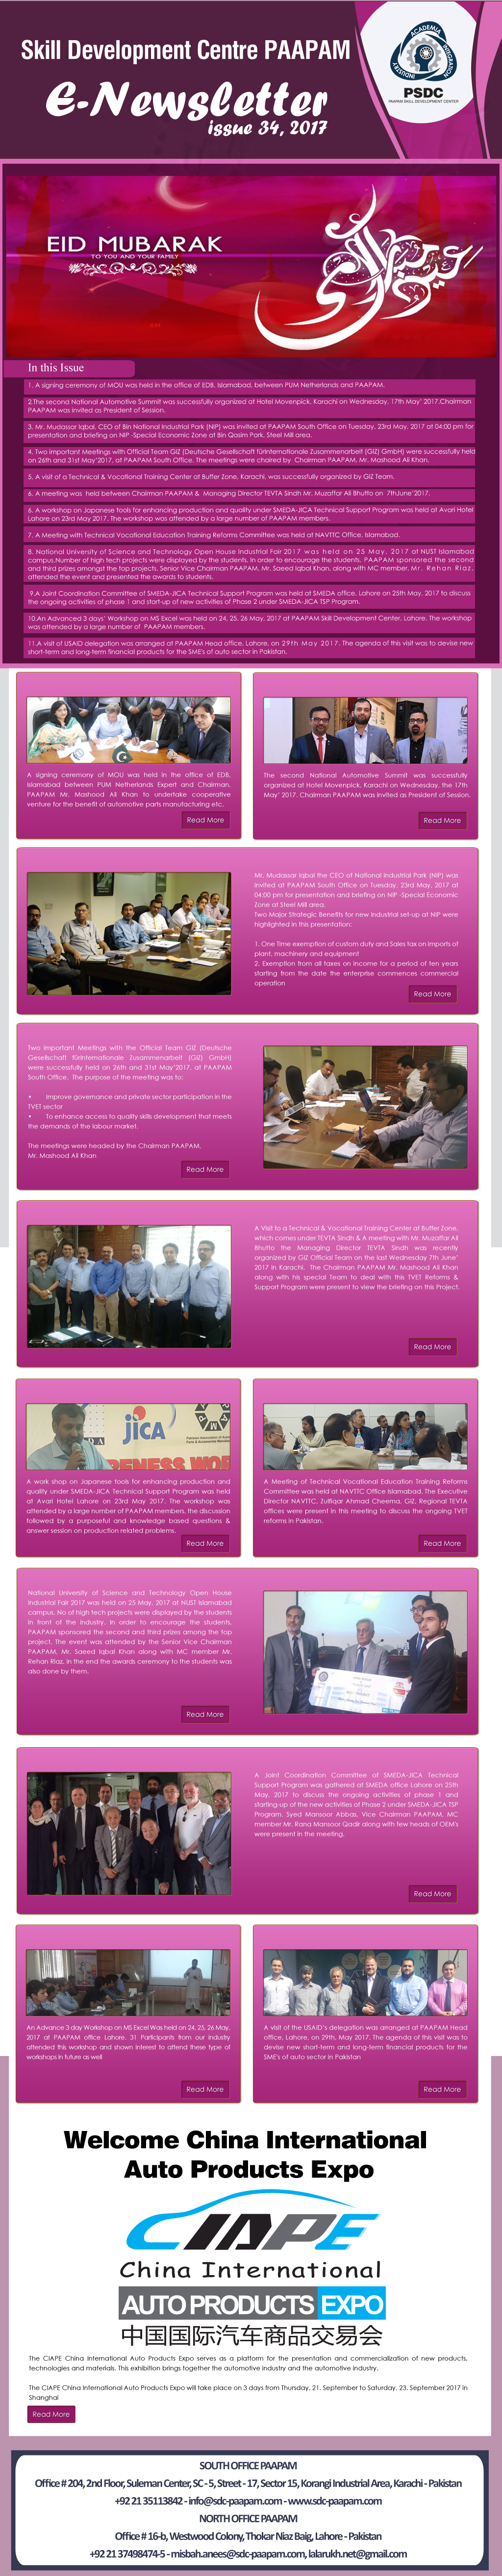 SDC PAAPAM eNewsletter, Issue 3